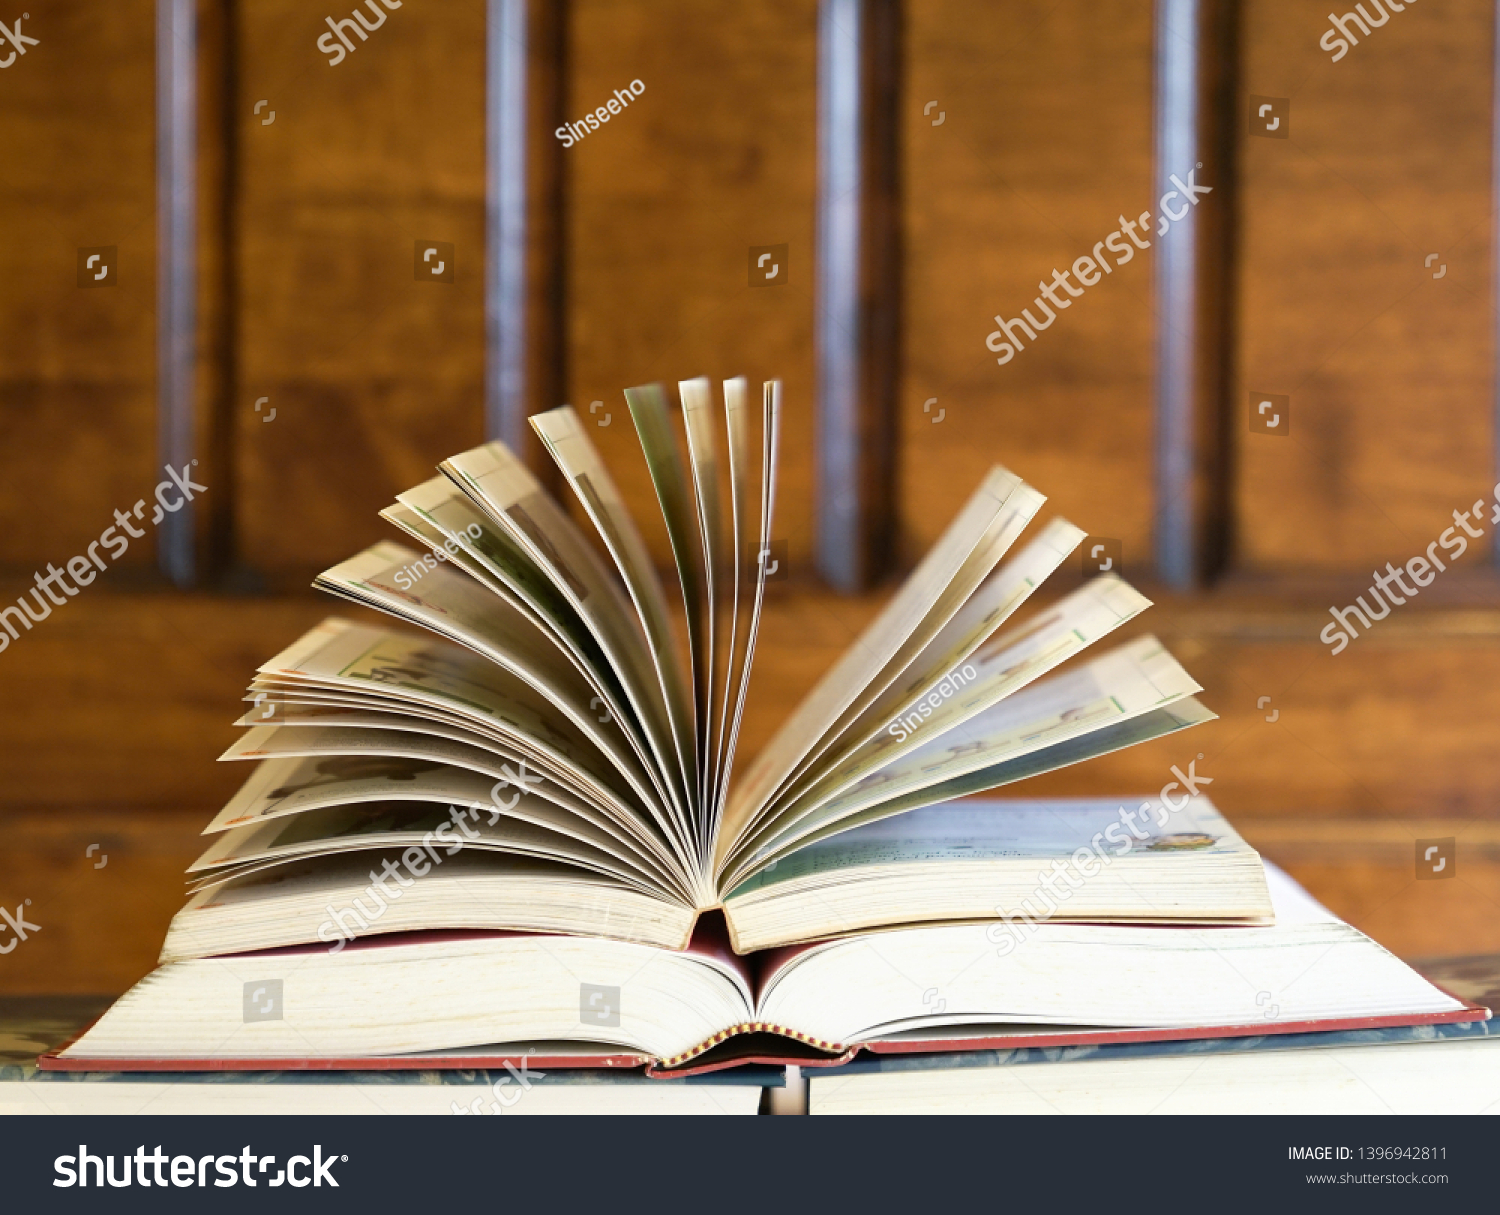 Open textbook on top of books with wood background, an education concept #1396942811